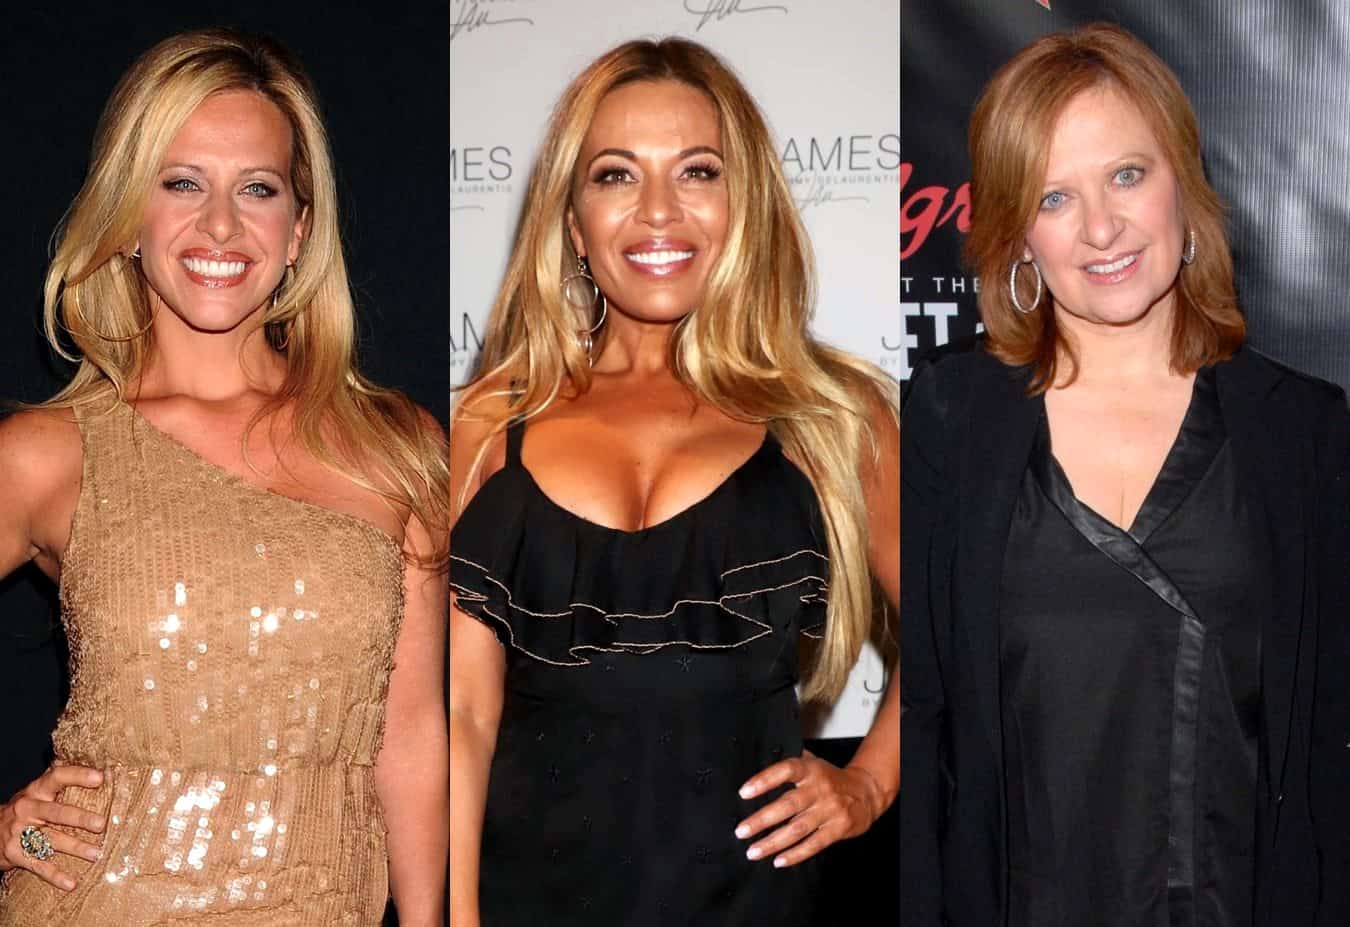 Dina Manzo Reveals Dolores Catania Was Supposed to Be on Season One of RHONJ But Was Replaced by Caroline Manzo After Backing Out